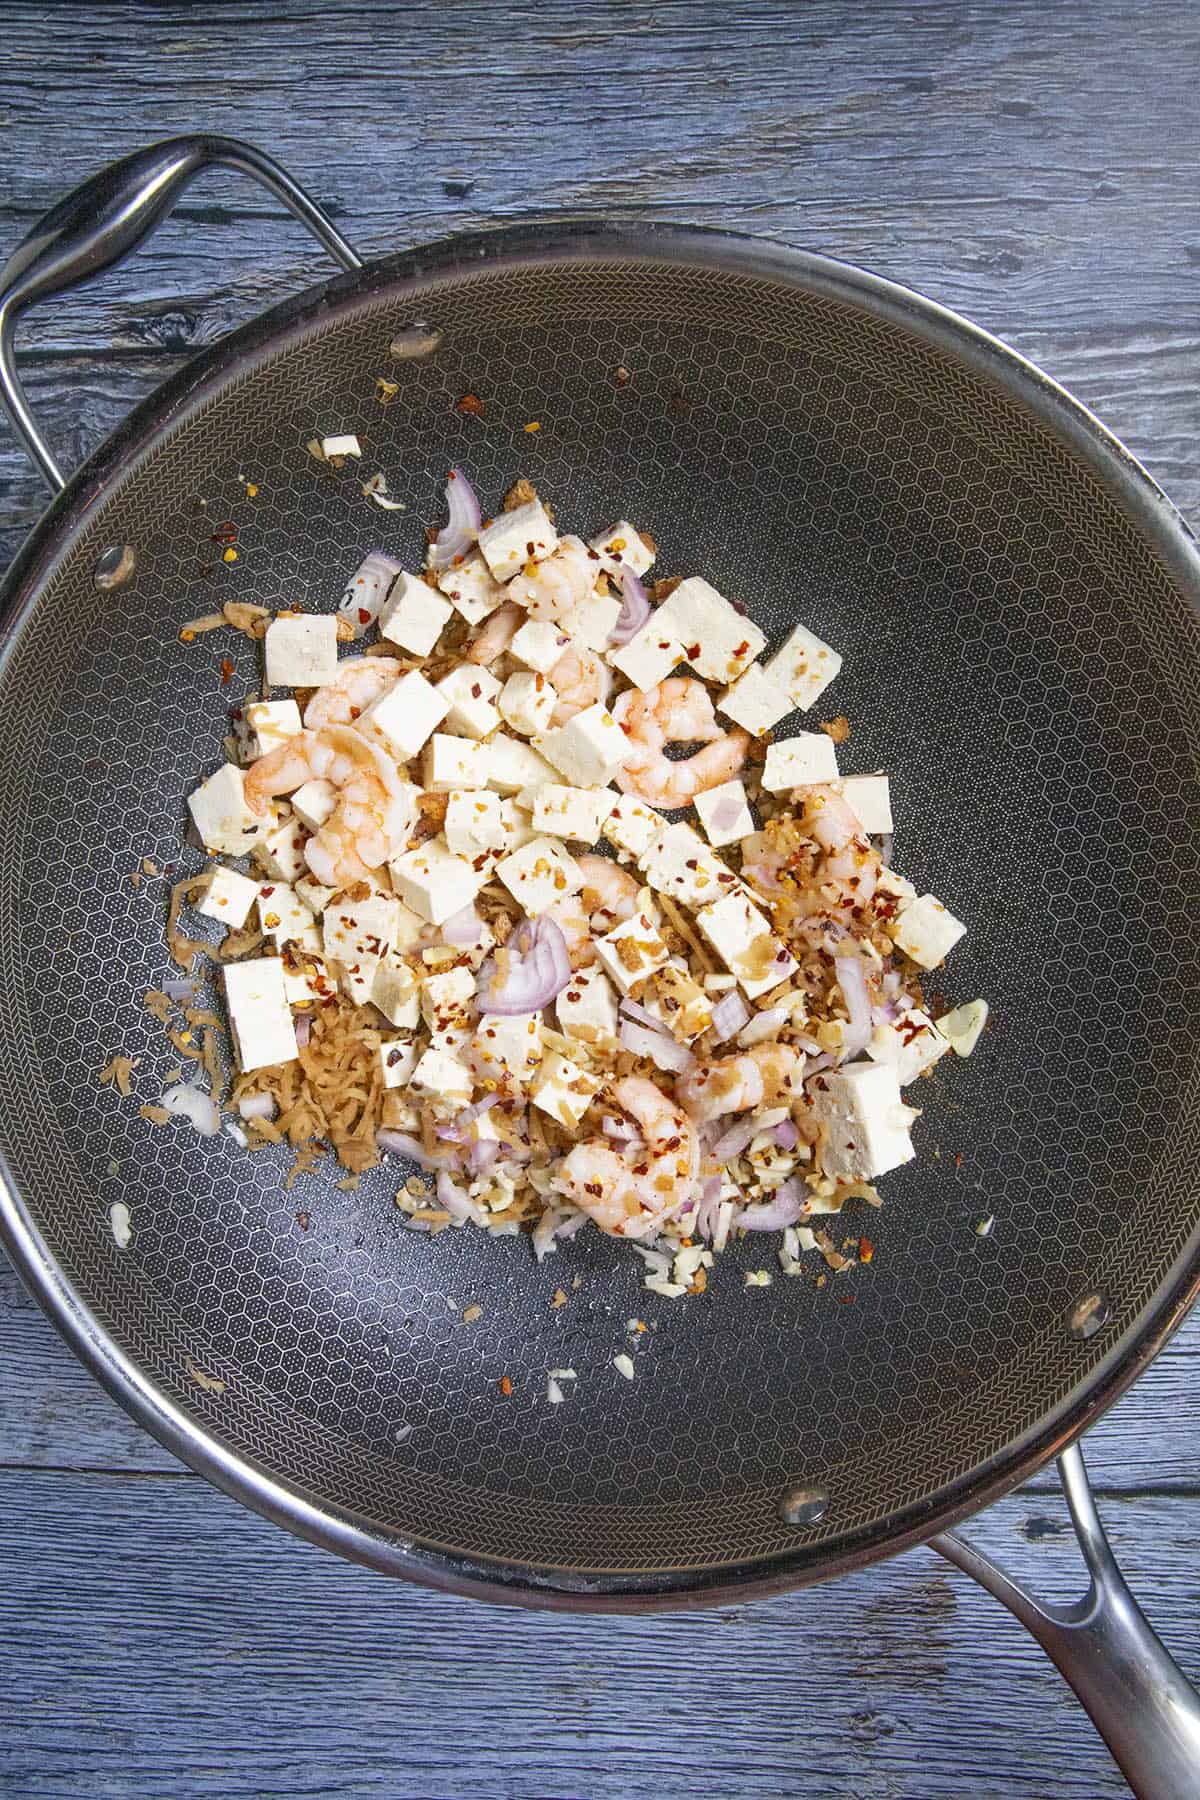 Stirring tofu and other ingredients in a pan to make Pad Thai